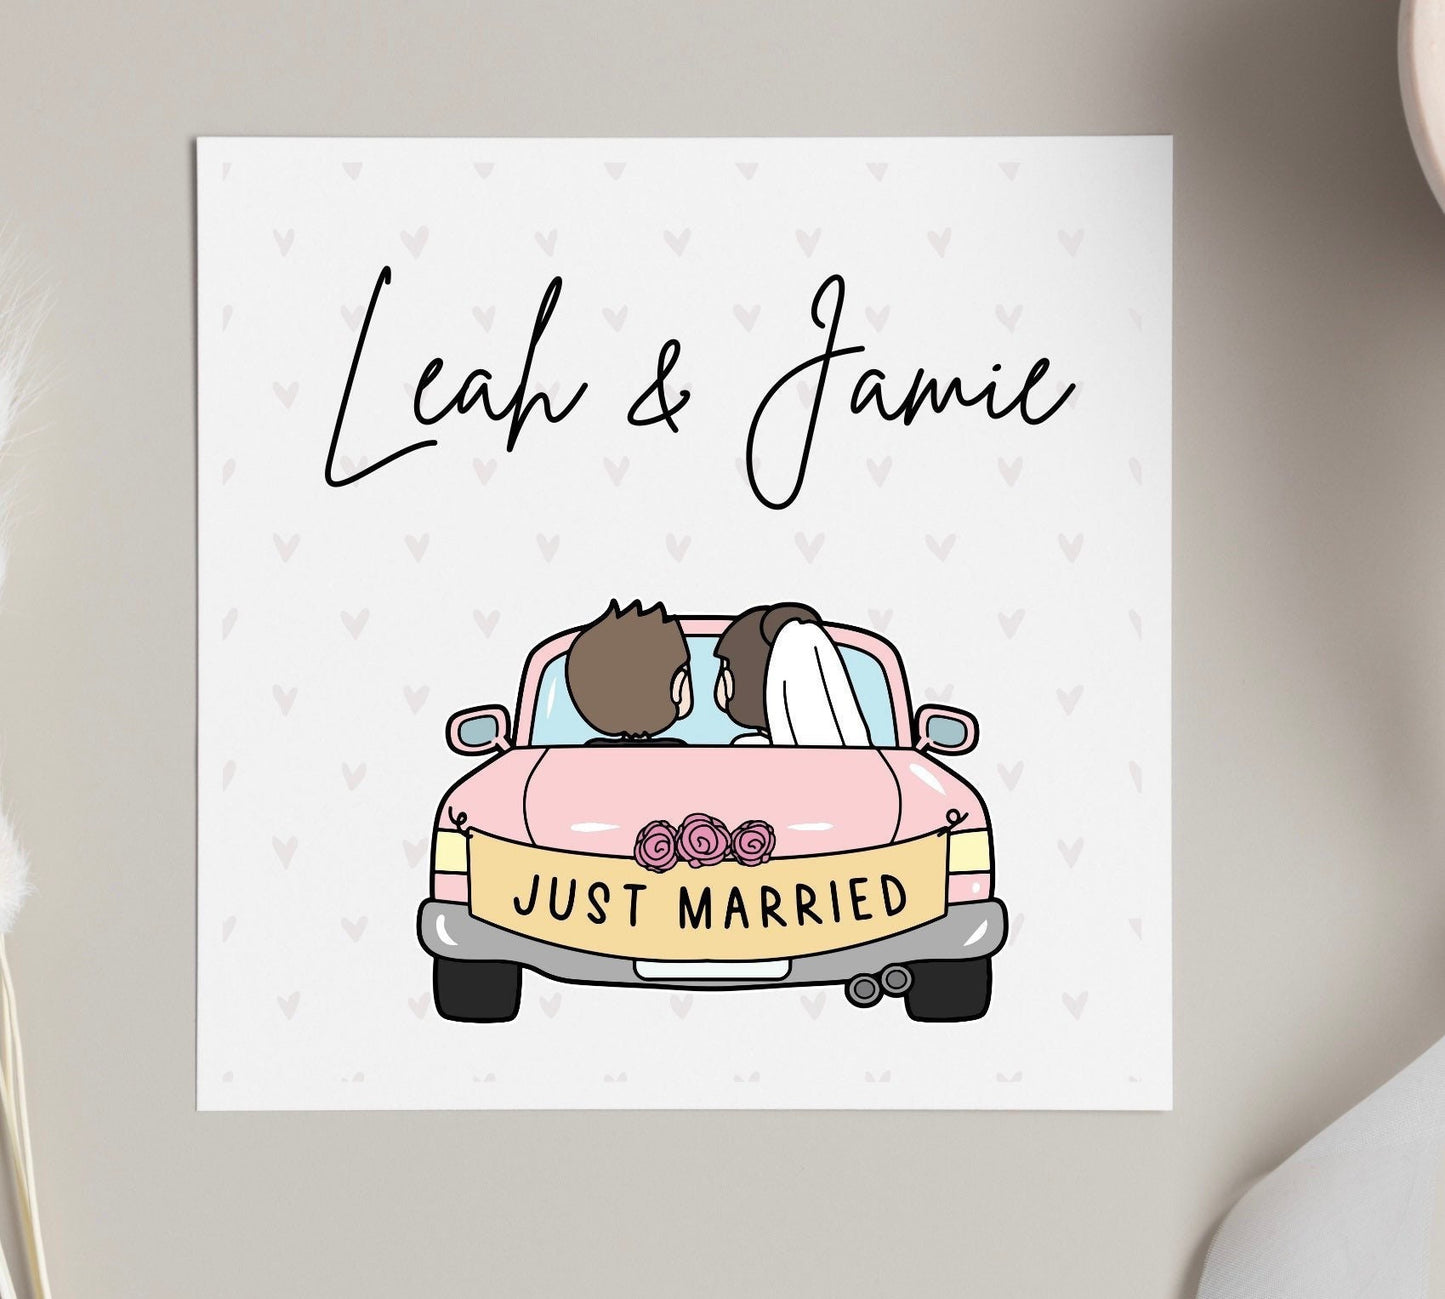 Just married wedding car card, personalised wedding day card for friends, daughter or son newlyweds